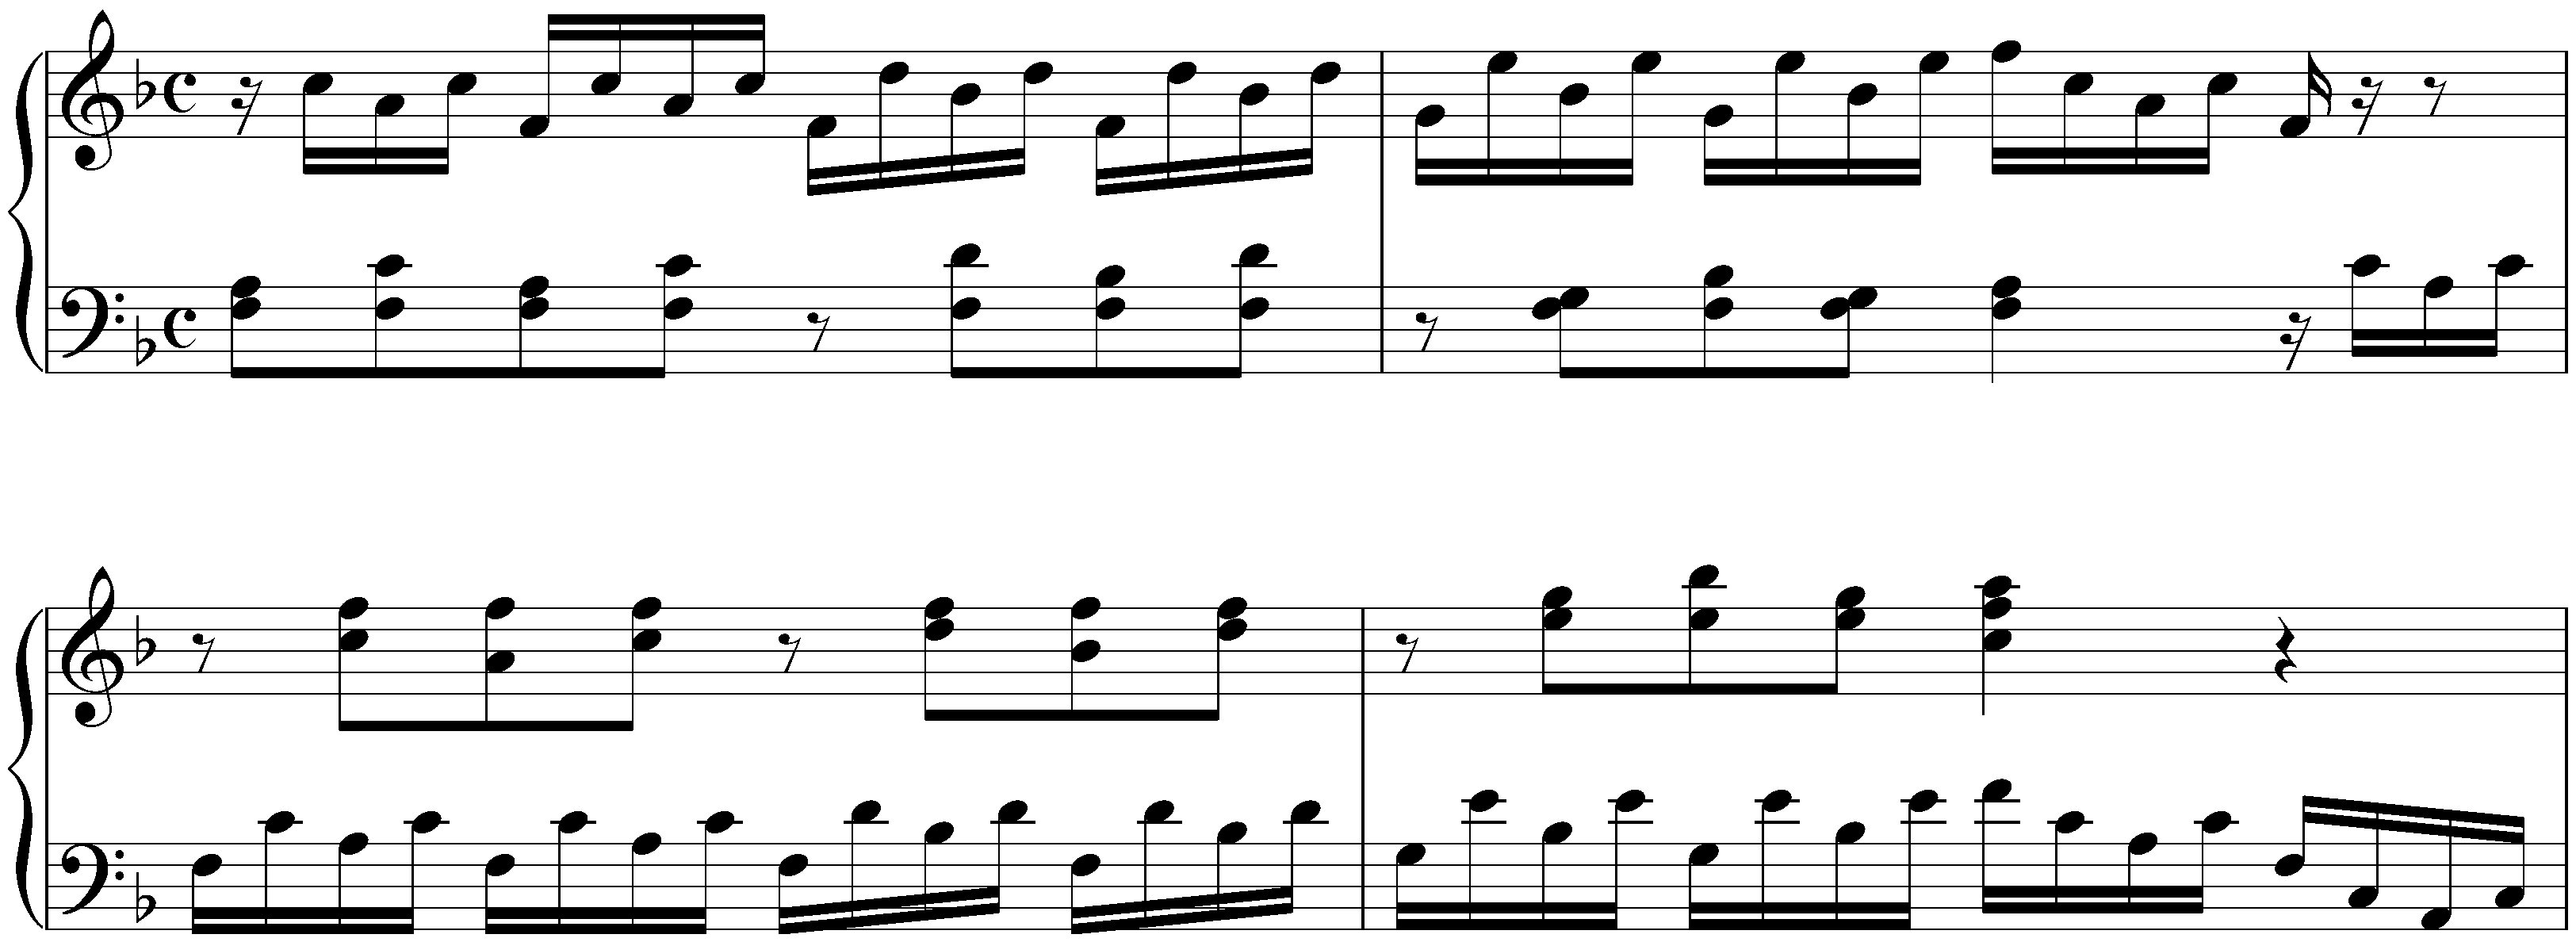 Nine little Preludes from the Notebook for Wilhelm Friedemann Bach, BWV 924–932; 4. F major, BWV 927